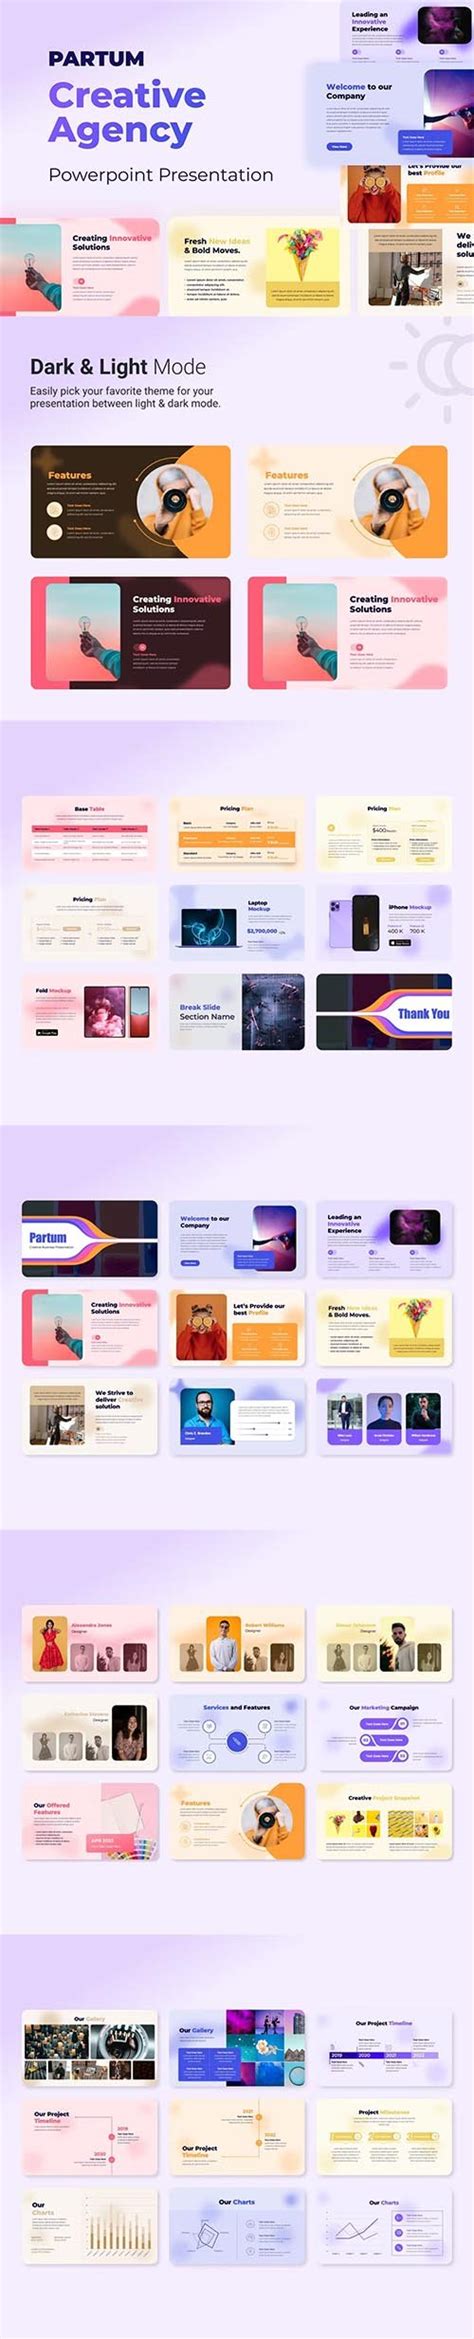 Partum Creative Agency Ppt Presentation Template Graphic 4 You